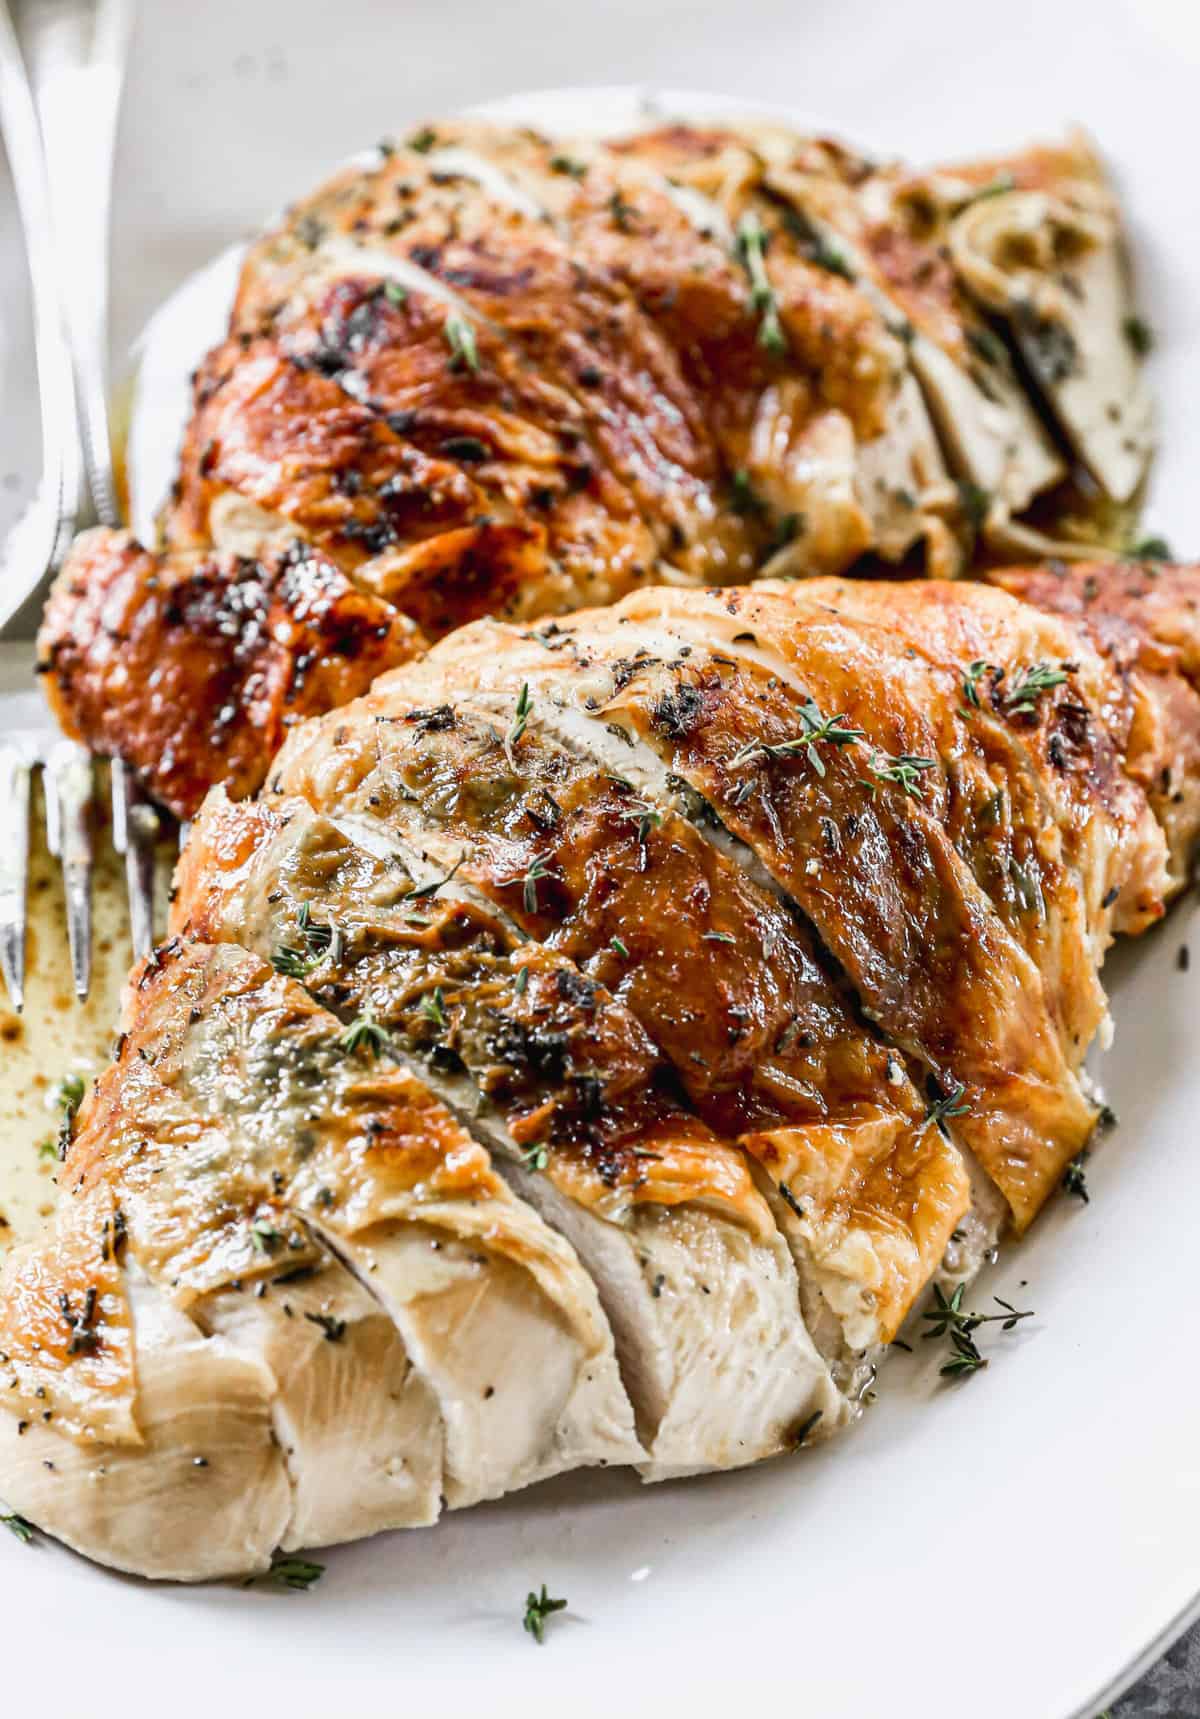 A close up image of a golden herb Roasted Turkey breast, sliced and ready to serve.